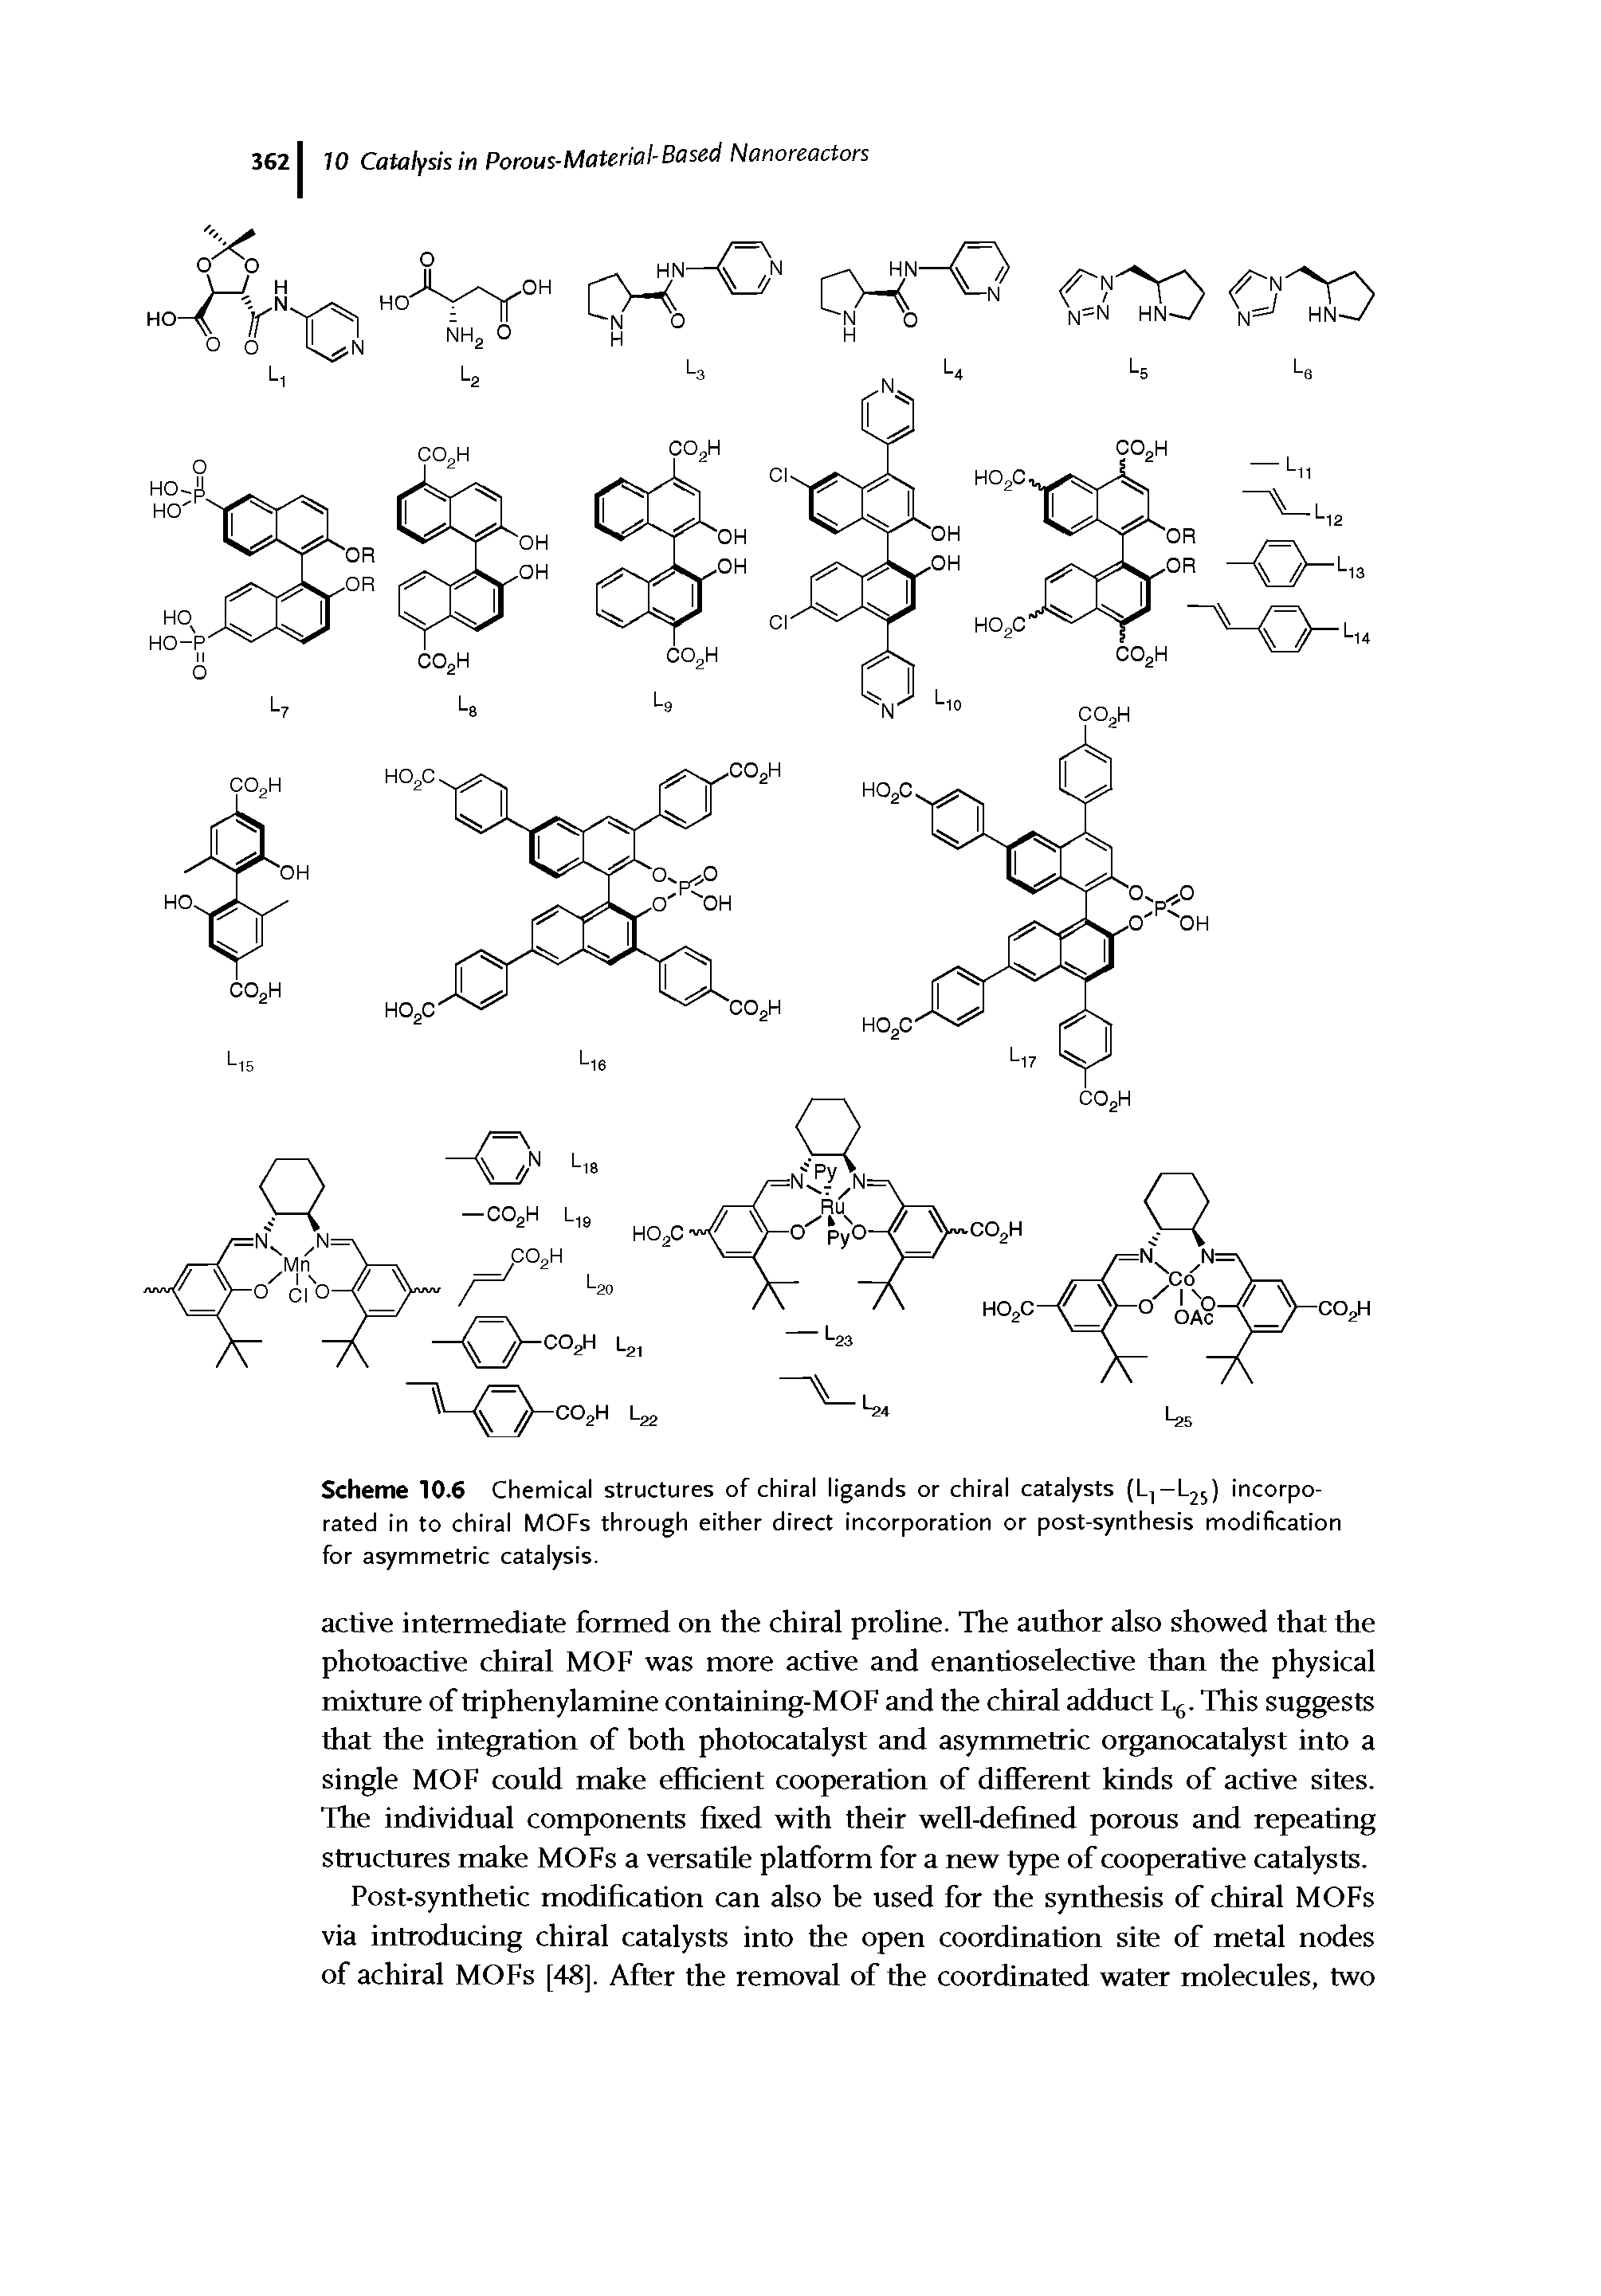 Scheme 10.6 Chemical structures of chiral ligands or chiral catalysts (Lj-Ljj) incorporated in to chiral MOFs through either direct incorporation or post-synthesis modification for asymmetric catalysis.